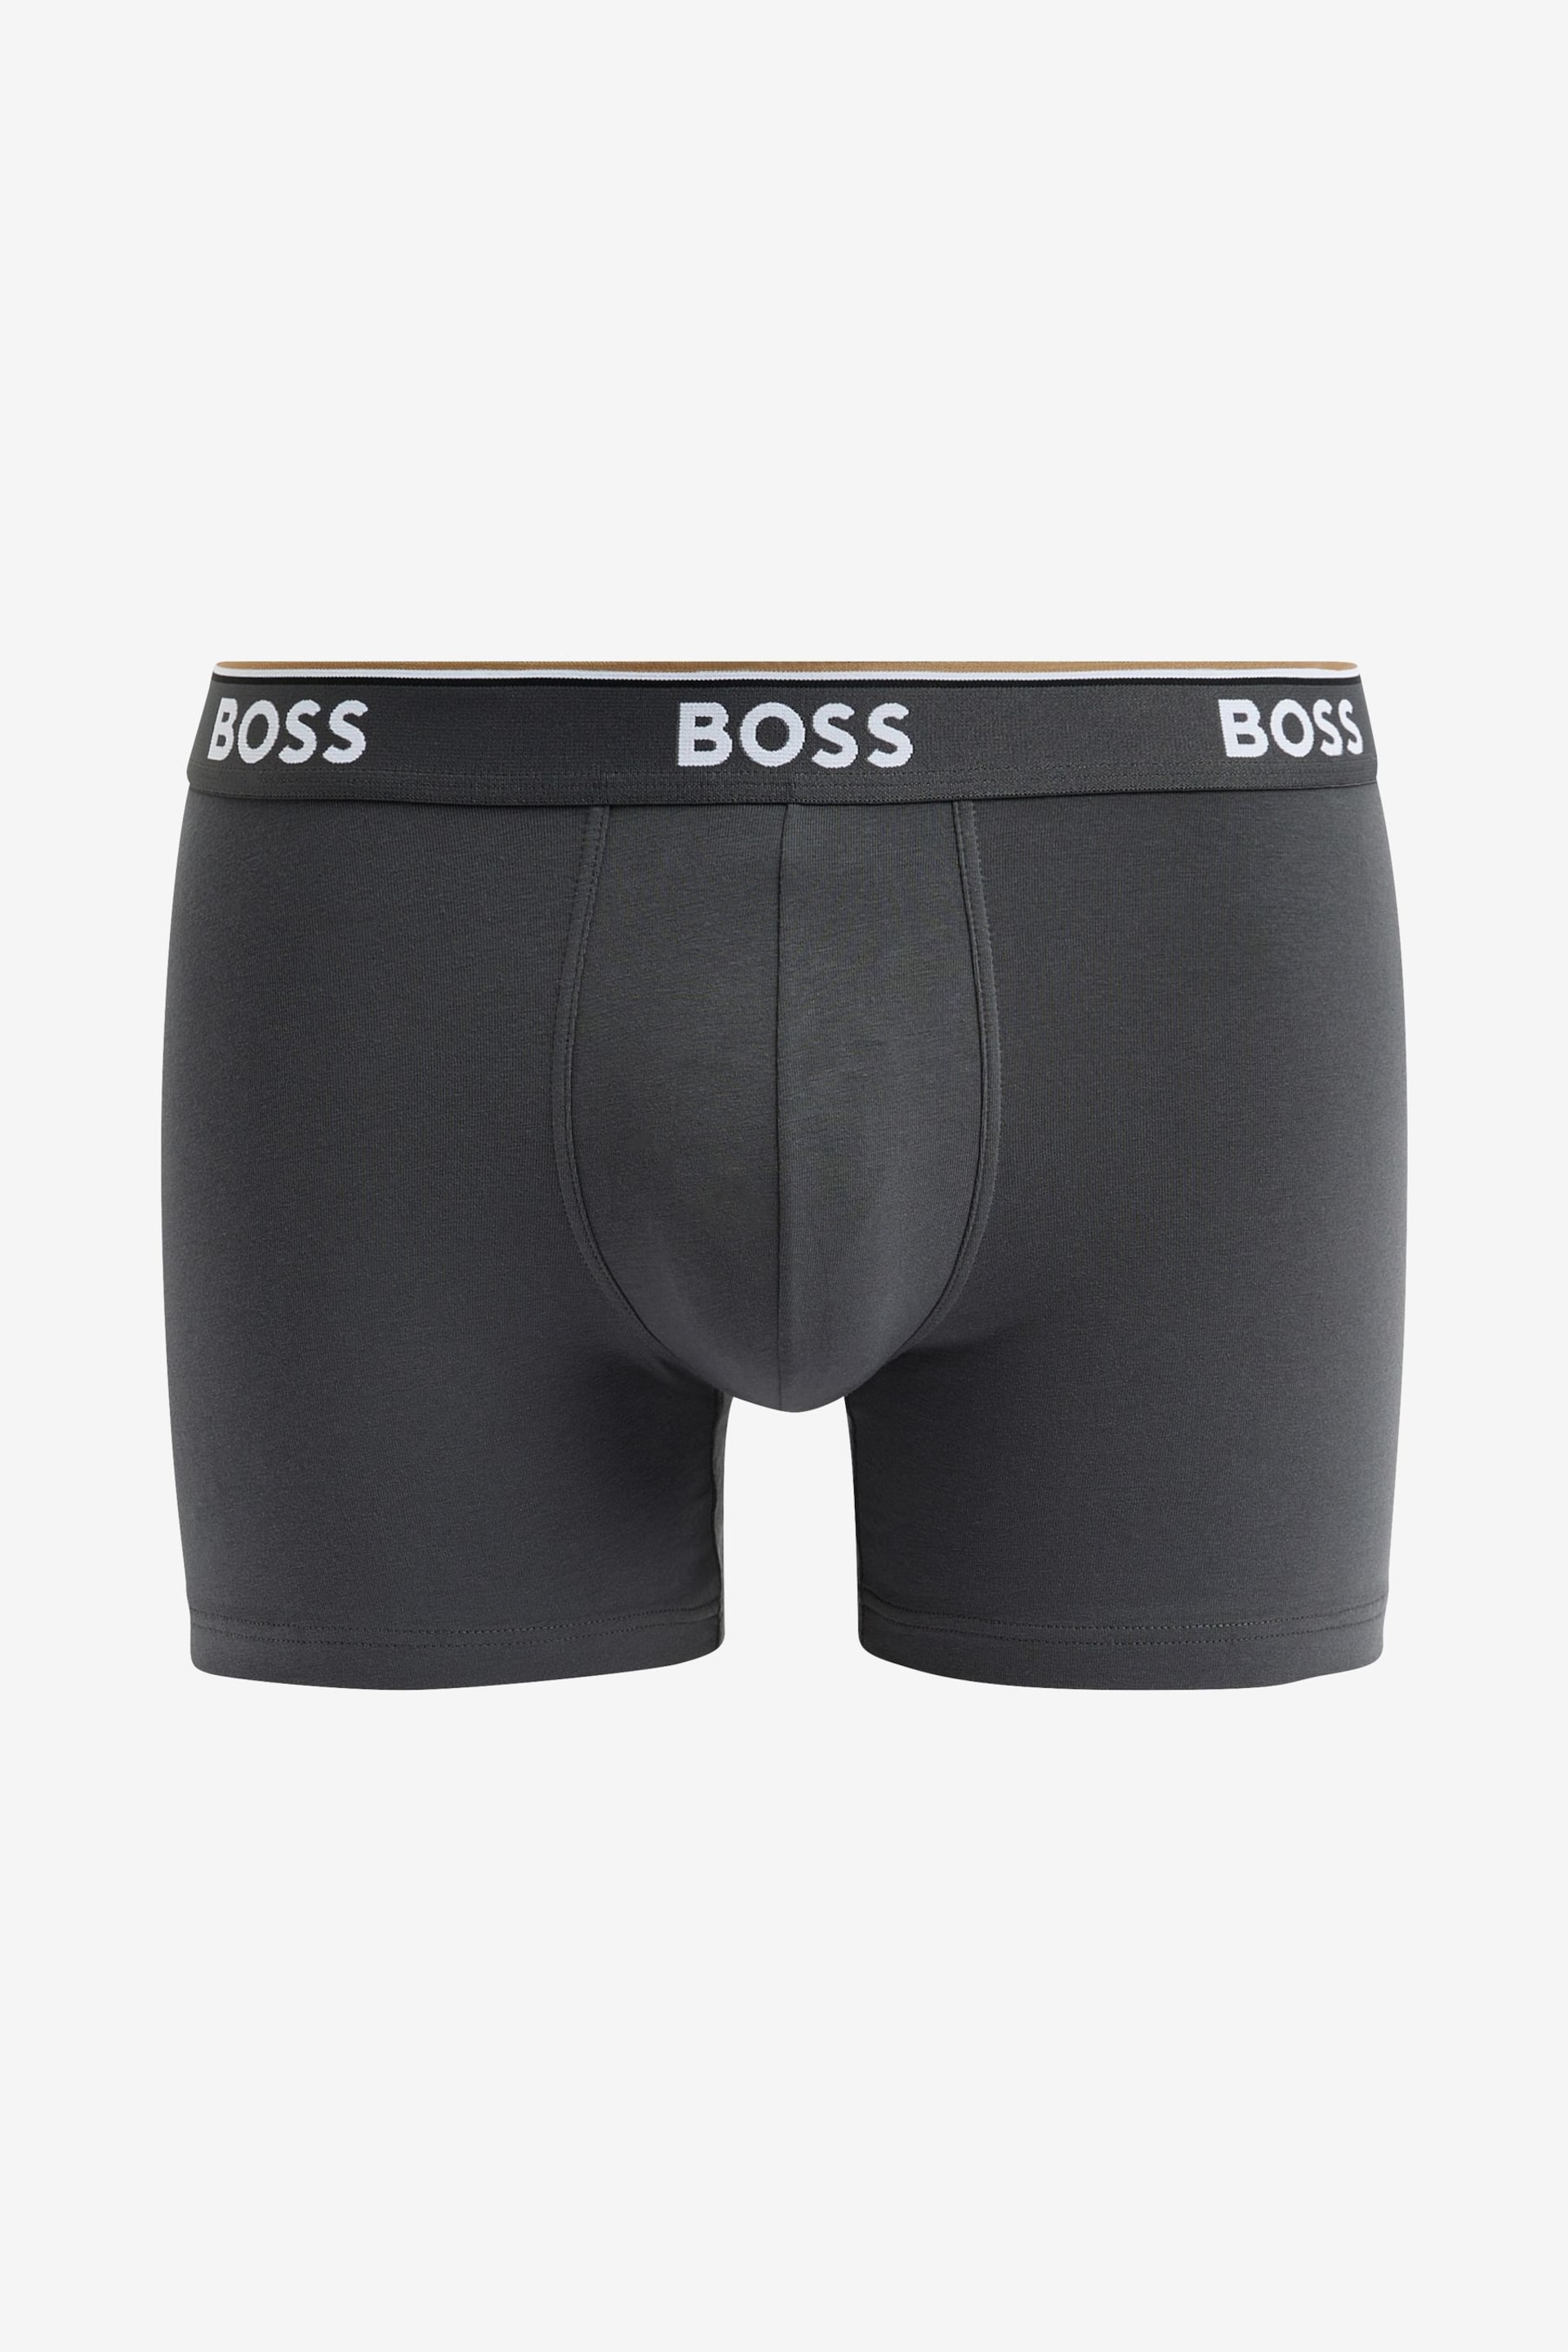 BOSS Blue Logo Waistband Boxer Briefs in Stretch Cotton 3 Pack - Image 2 of 4